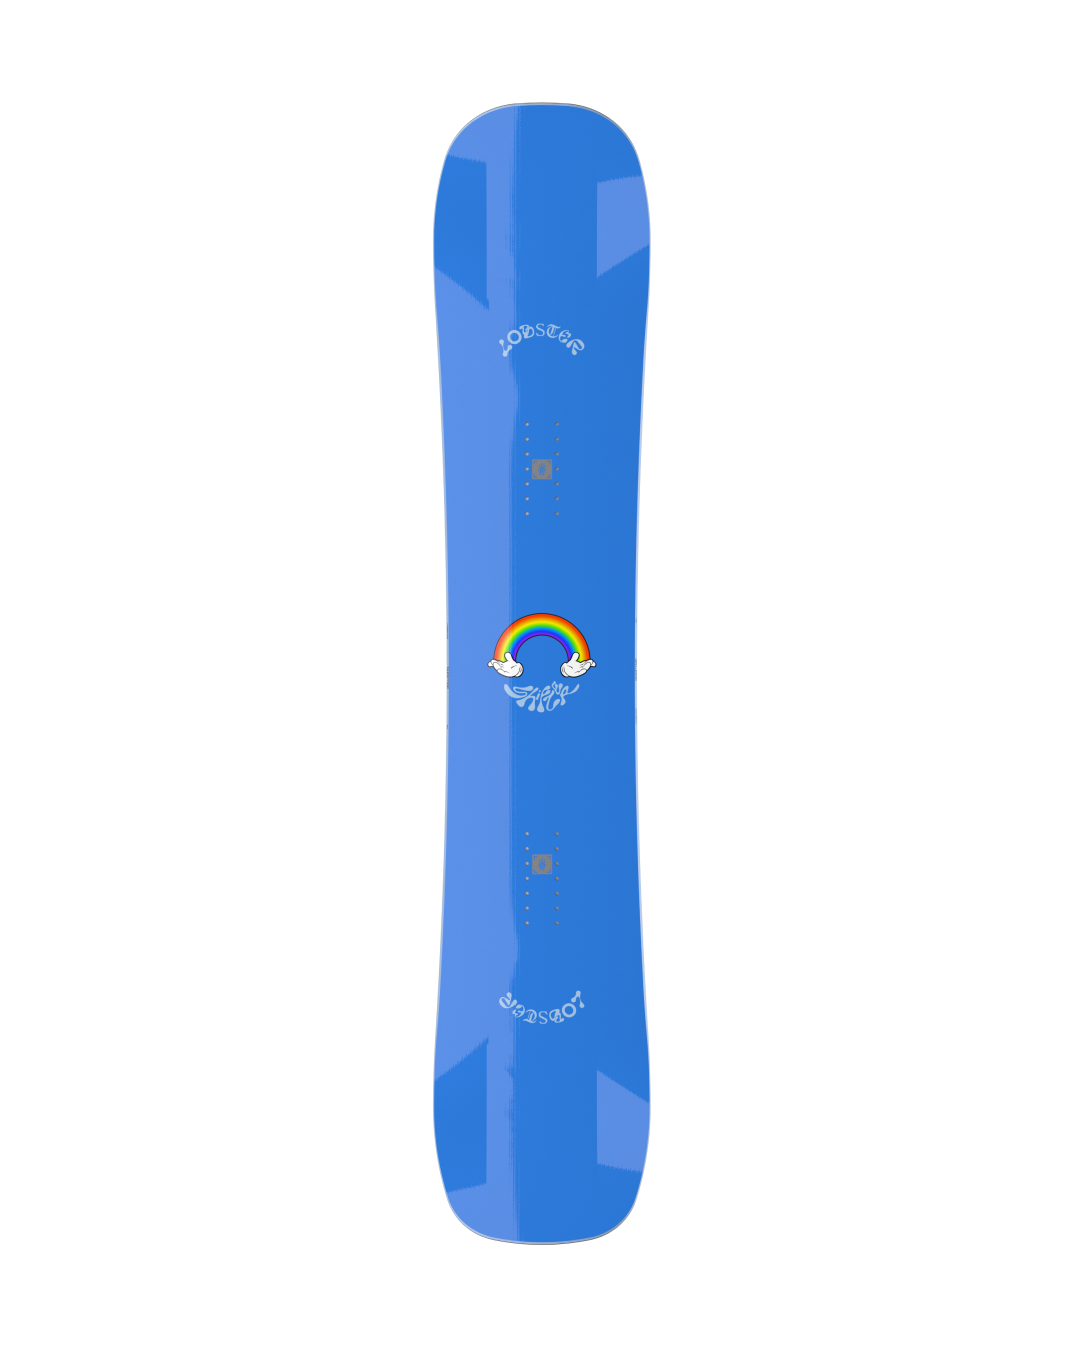 Shifter lobstersnowboards 2023-2024 snowboarding product image